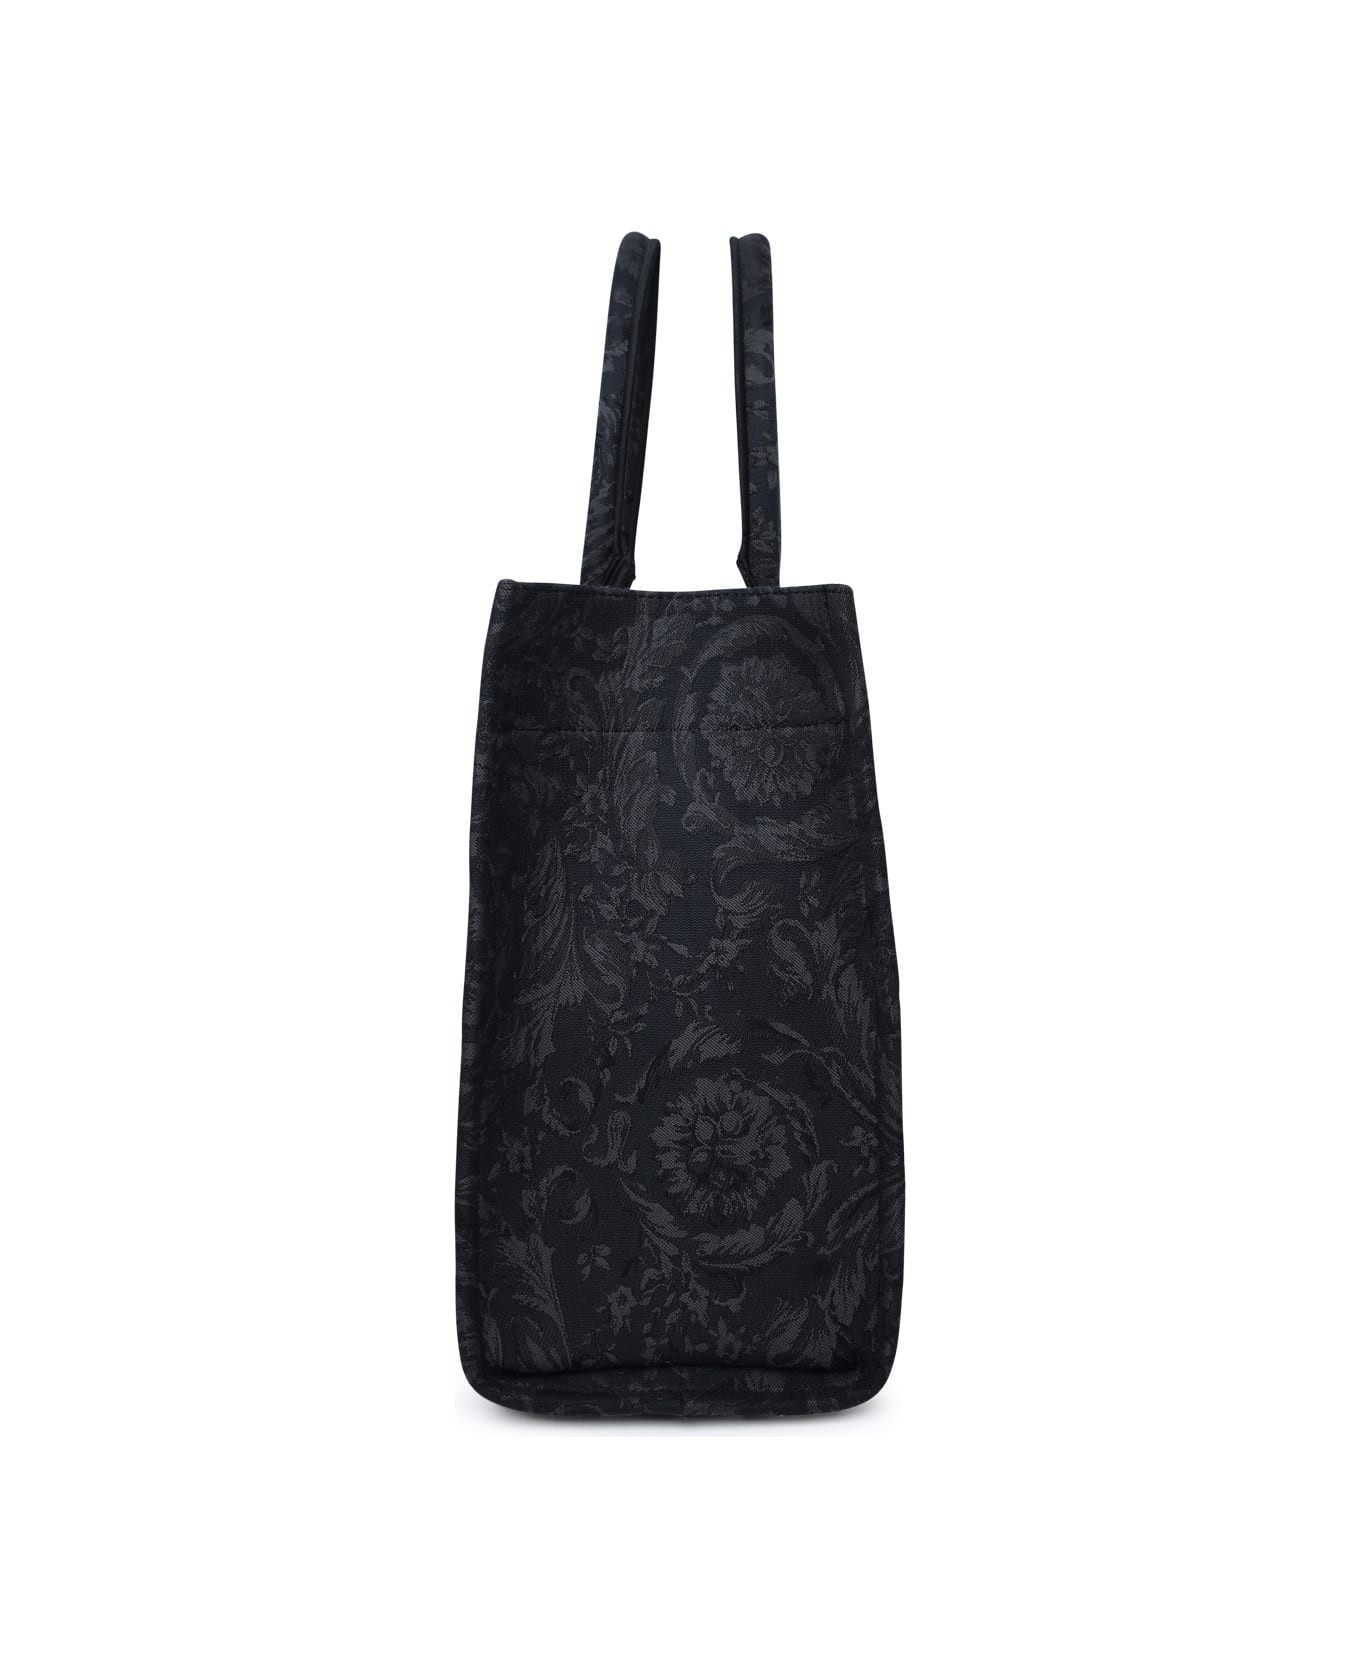 Versace Tote Bag Extra Large - Black トートバッグ